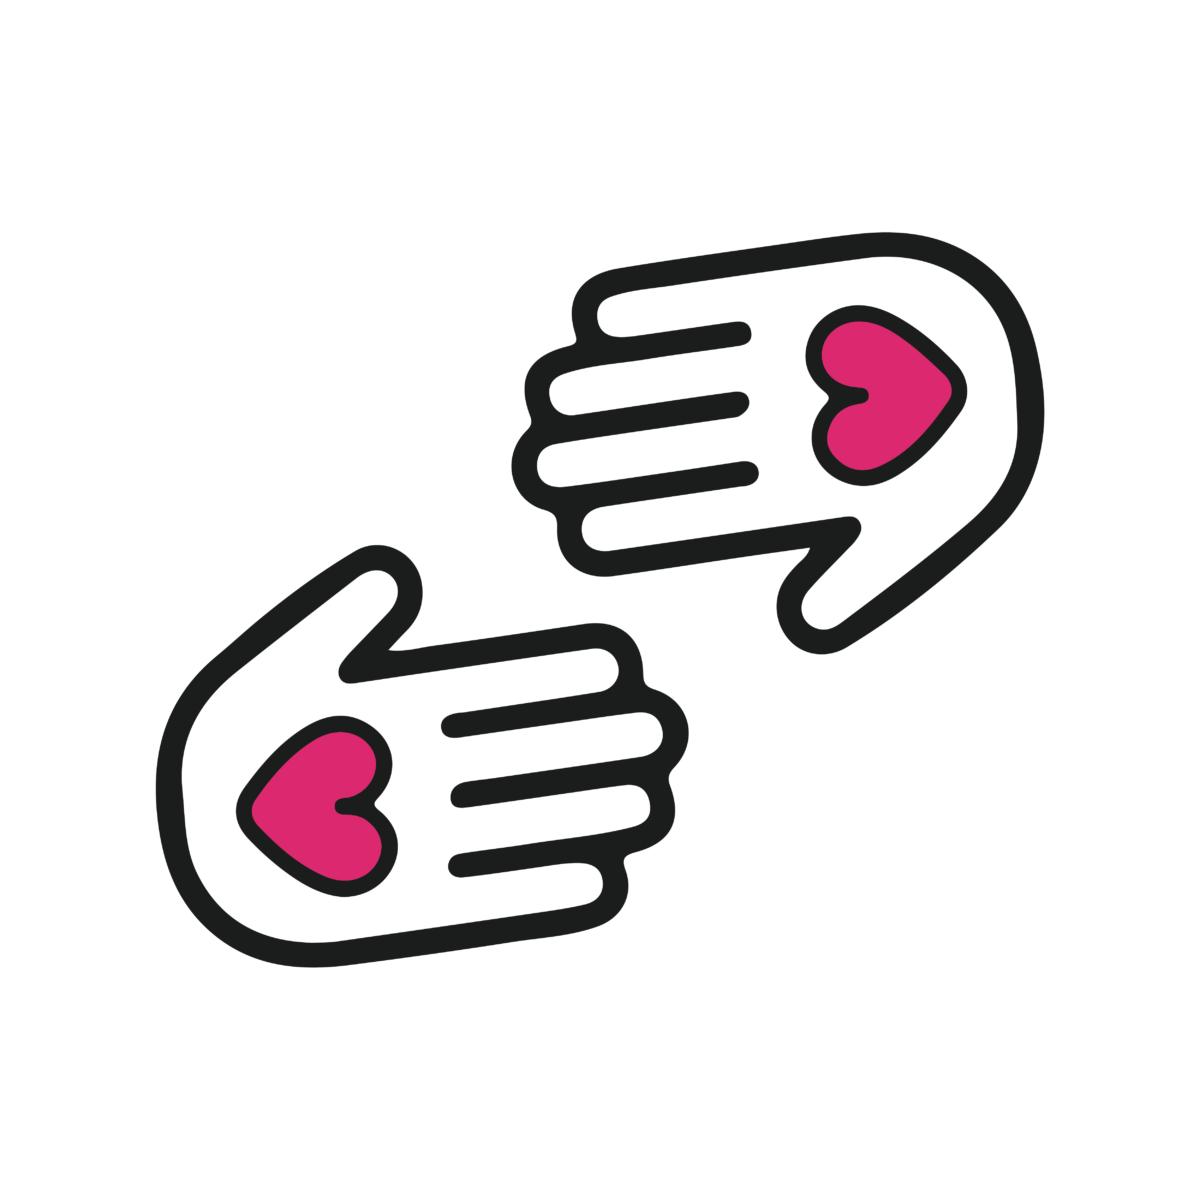 Illustration of two hands with pink hearts on the palms